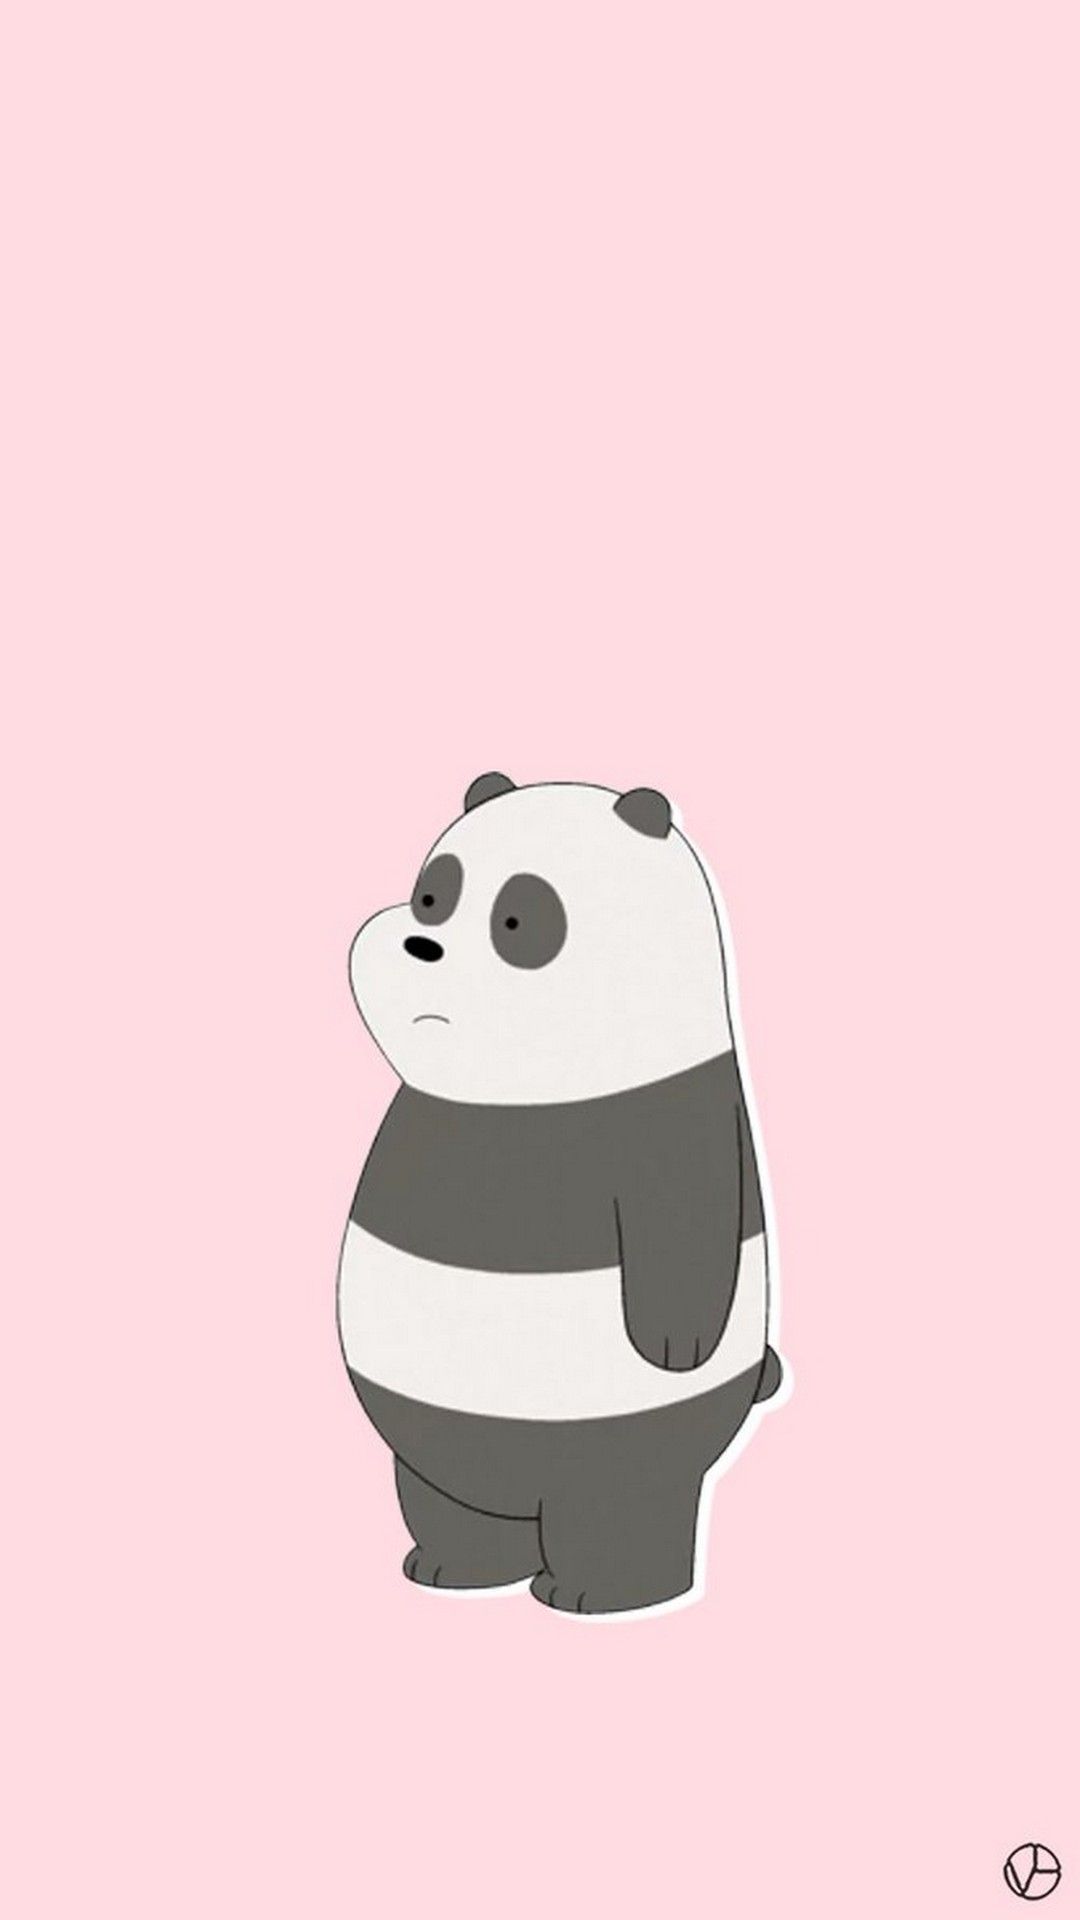 We bare bears wallpaper for iPhone and Android! - Panda